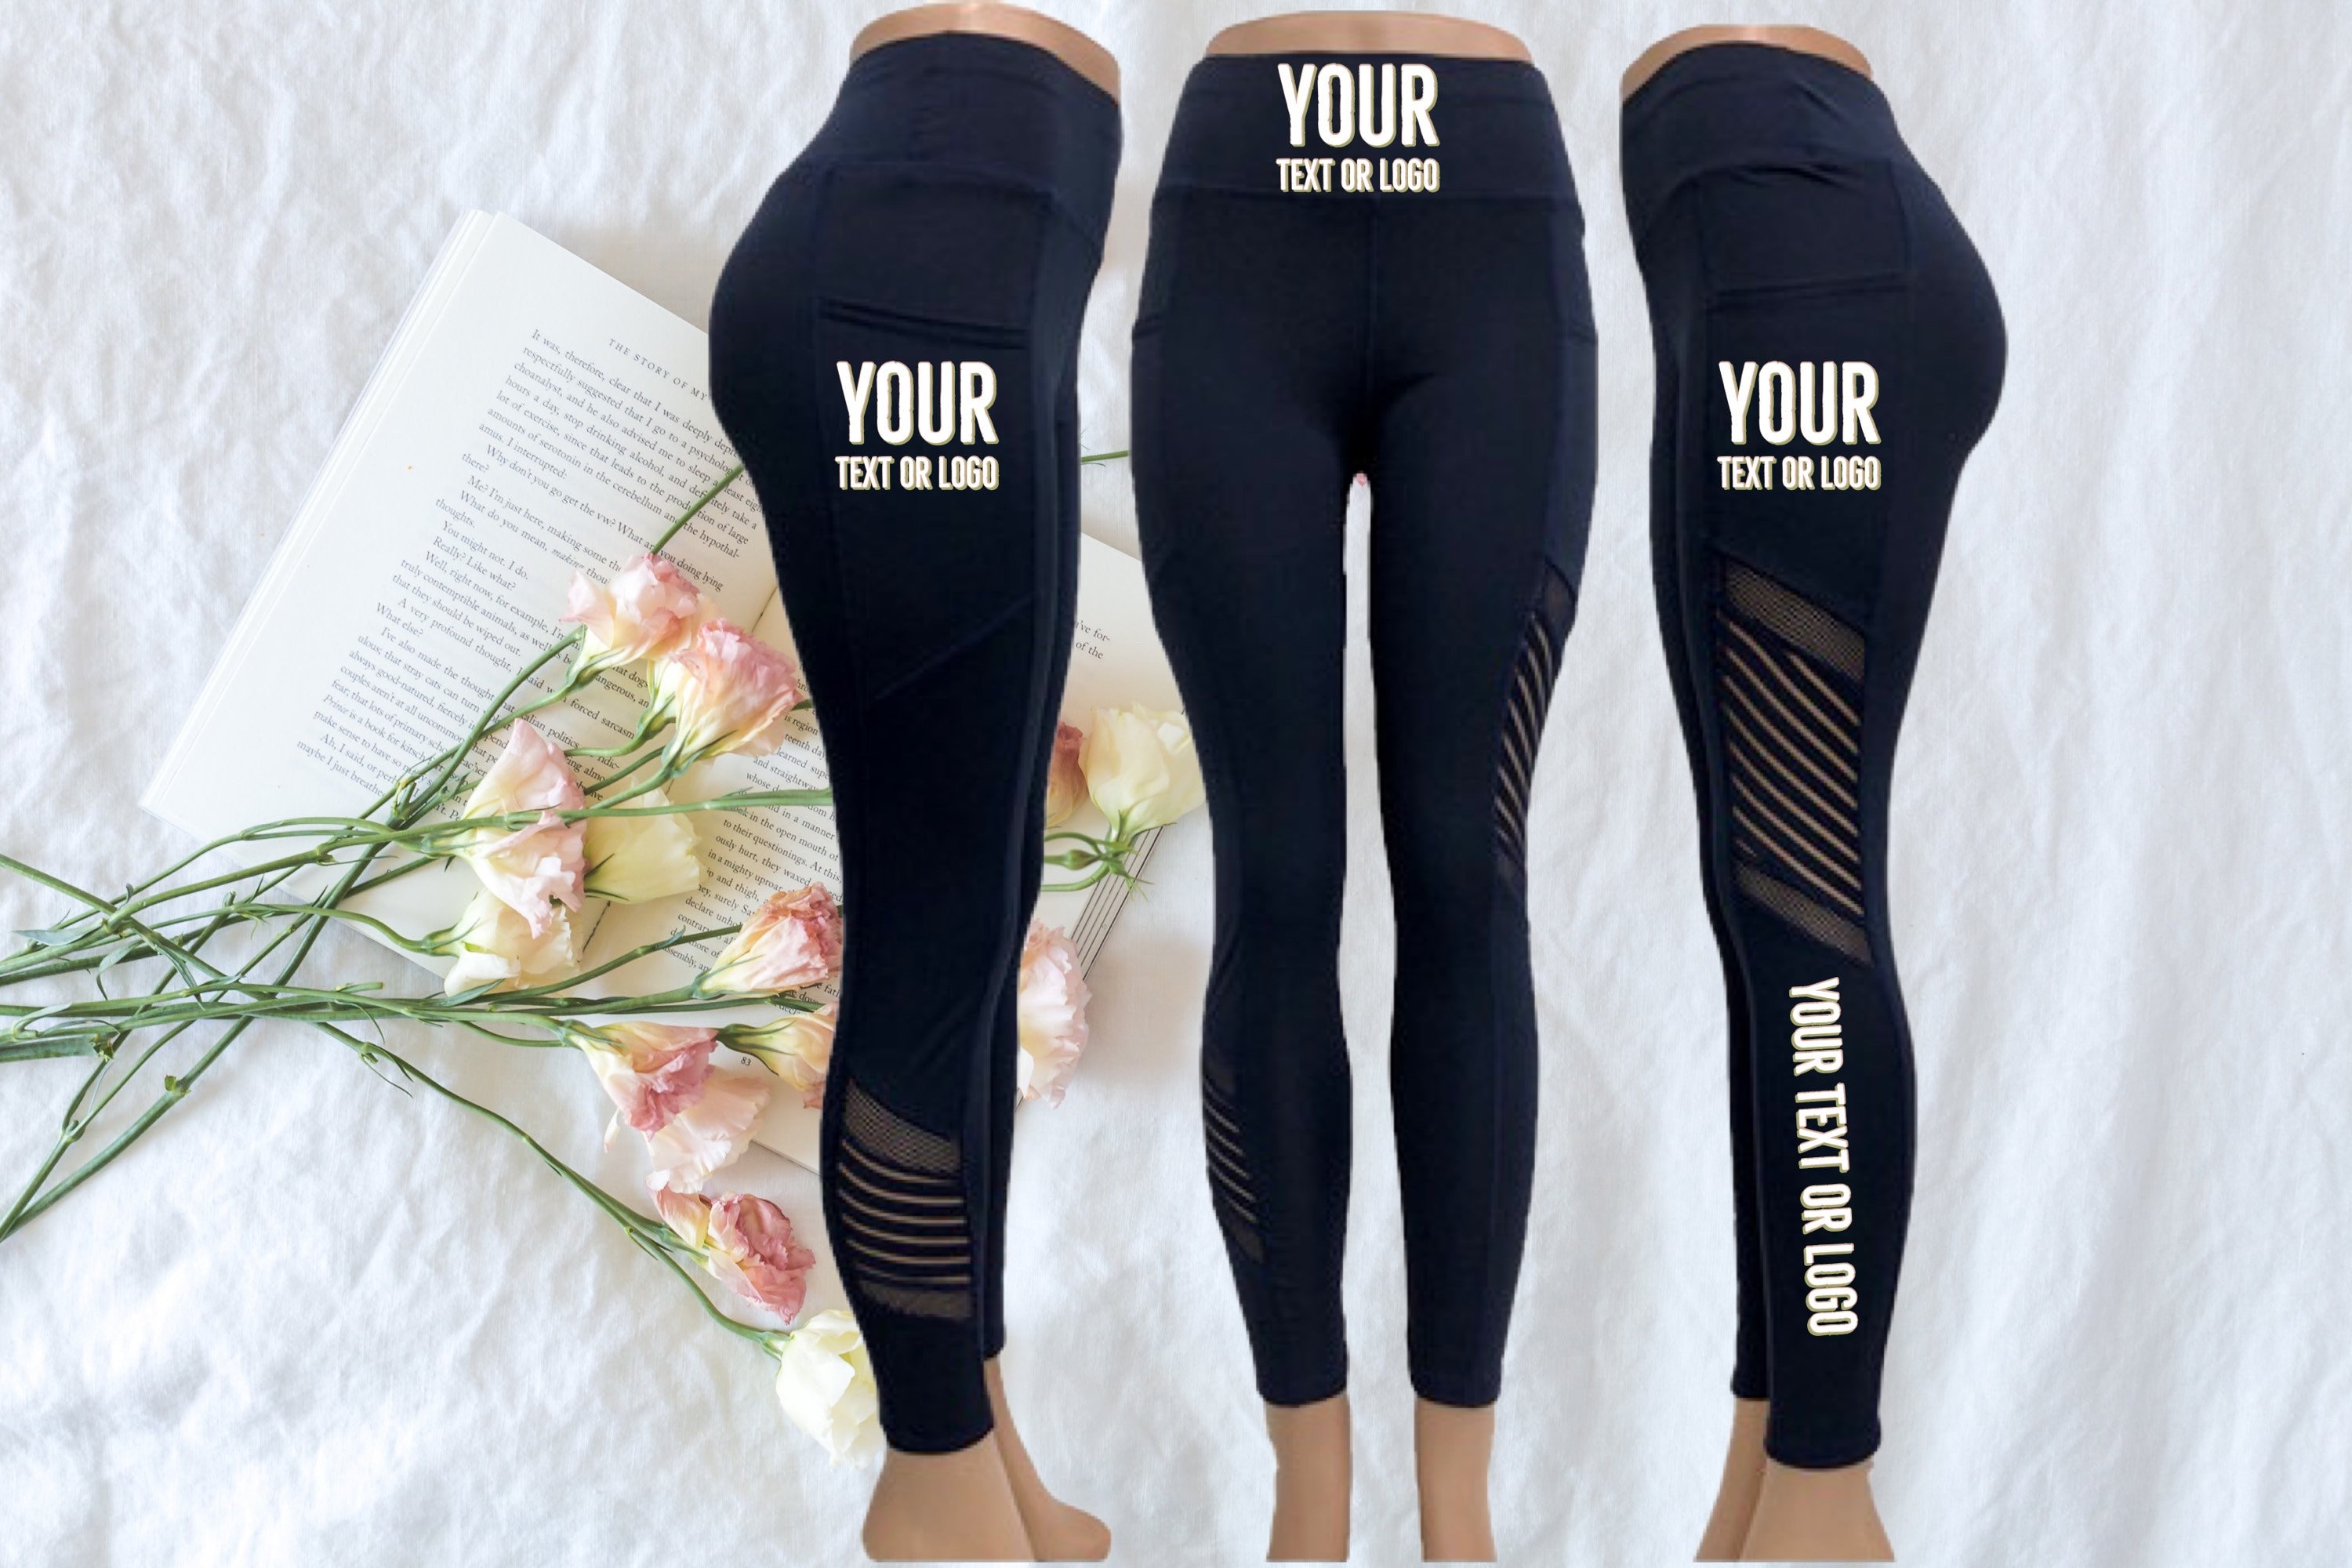 Leggings Park Buttery-Soft High Waist Black Joggers with Double